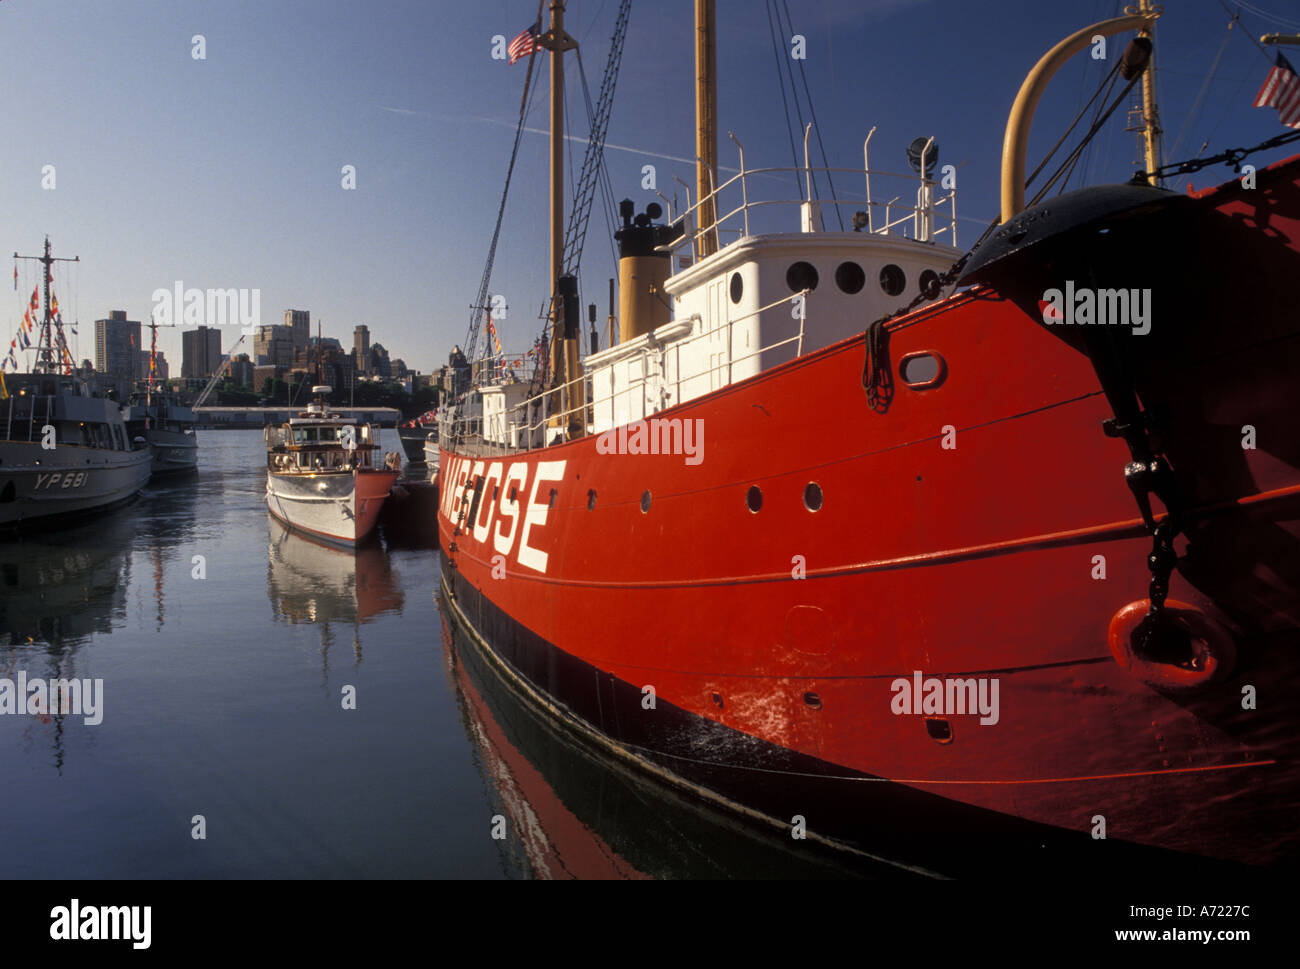 South Street Seaport Museum - #OnThisDay in 1968 the iconic lightship  Ambrose (LV-87/WAL-512), currently docked at Pier 16, arrived at the South  Street Seaport Museum. From 1908 until 1932 she had marked